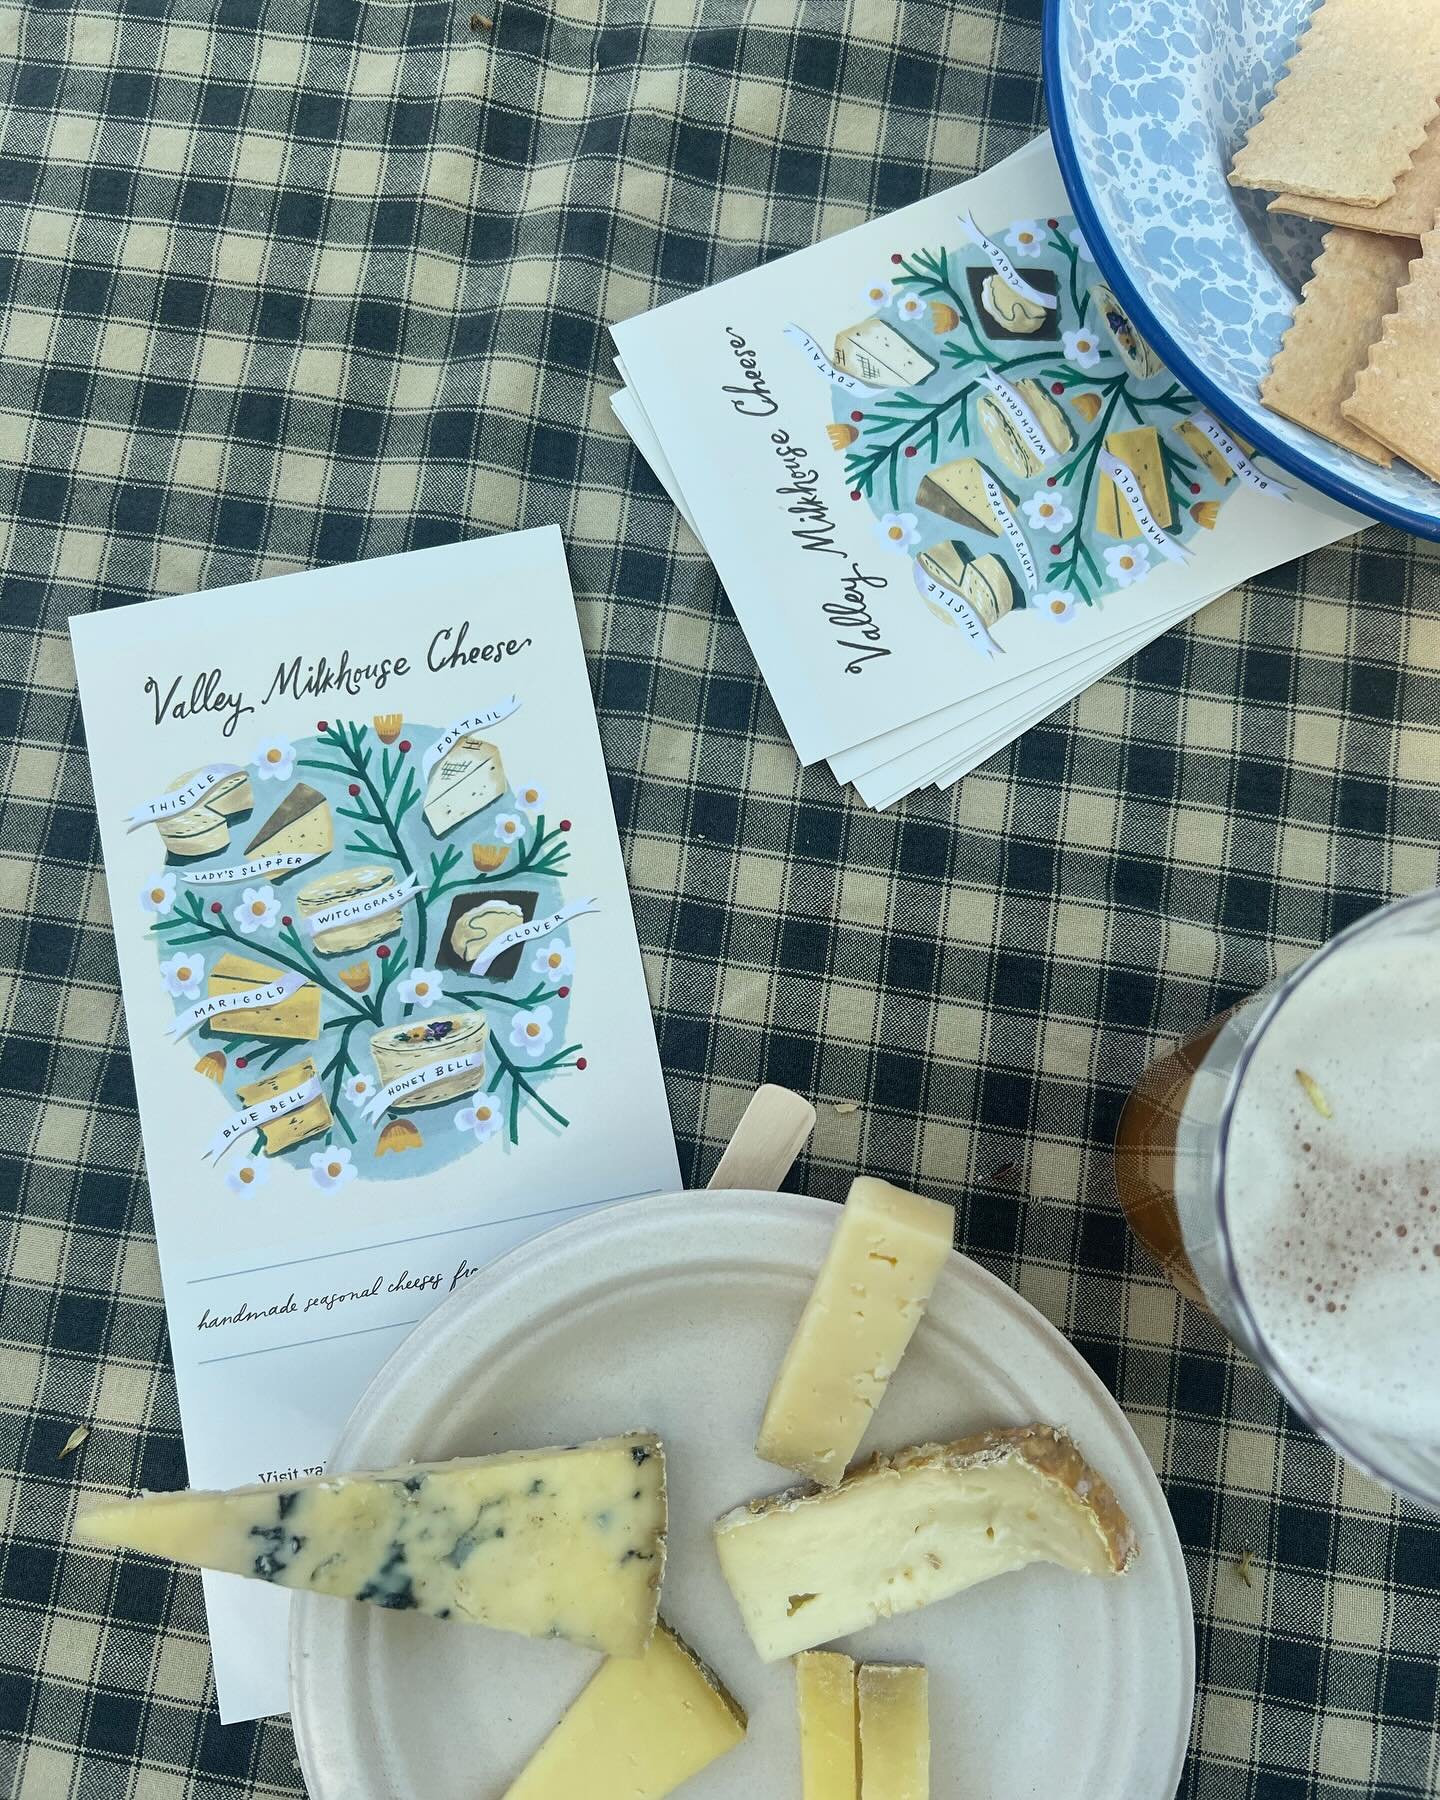 Say cheese! 🧀 Thank you for having us @milkhousecheese! We enjoyed learning about the process and sharing a passion for locally sourced and produced cheese 🫶 Look forward to more varieties of their delicious product available at the taproom 🍻